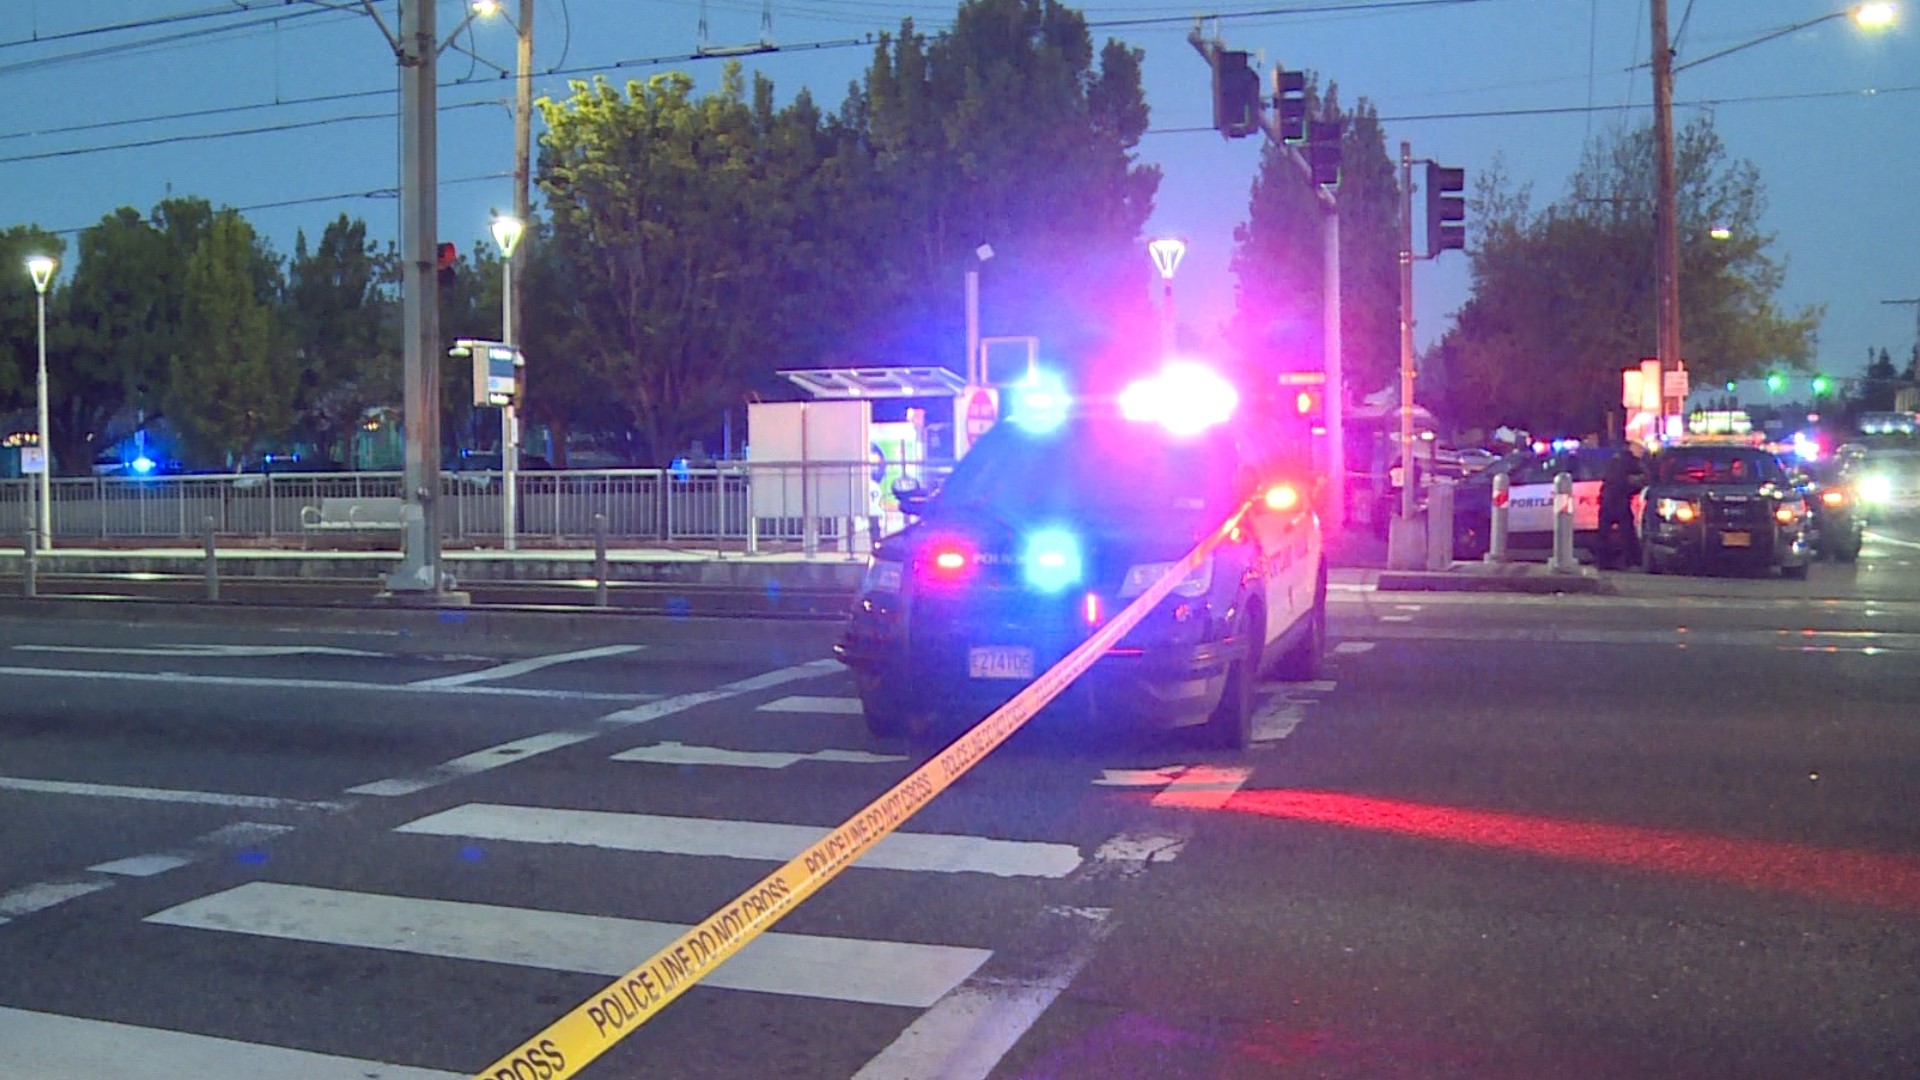 Portland police responded to a shooting at the intersection of East Burnside Street and Northeast 122nd Avenue on Tuesday evening that left one man dead.